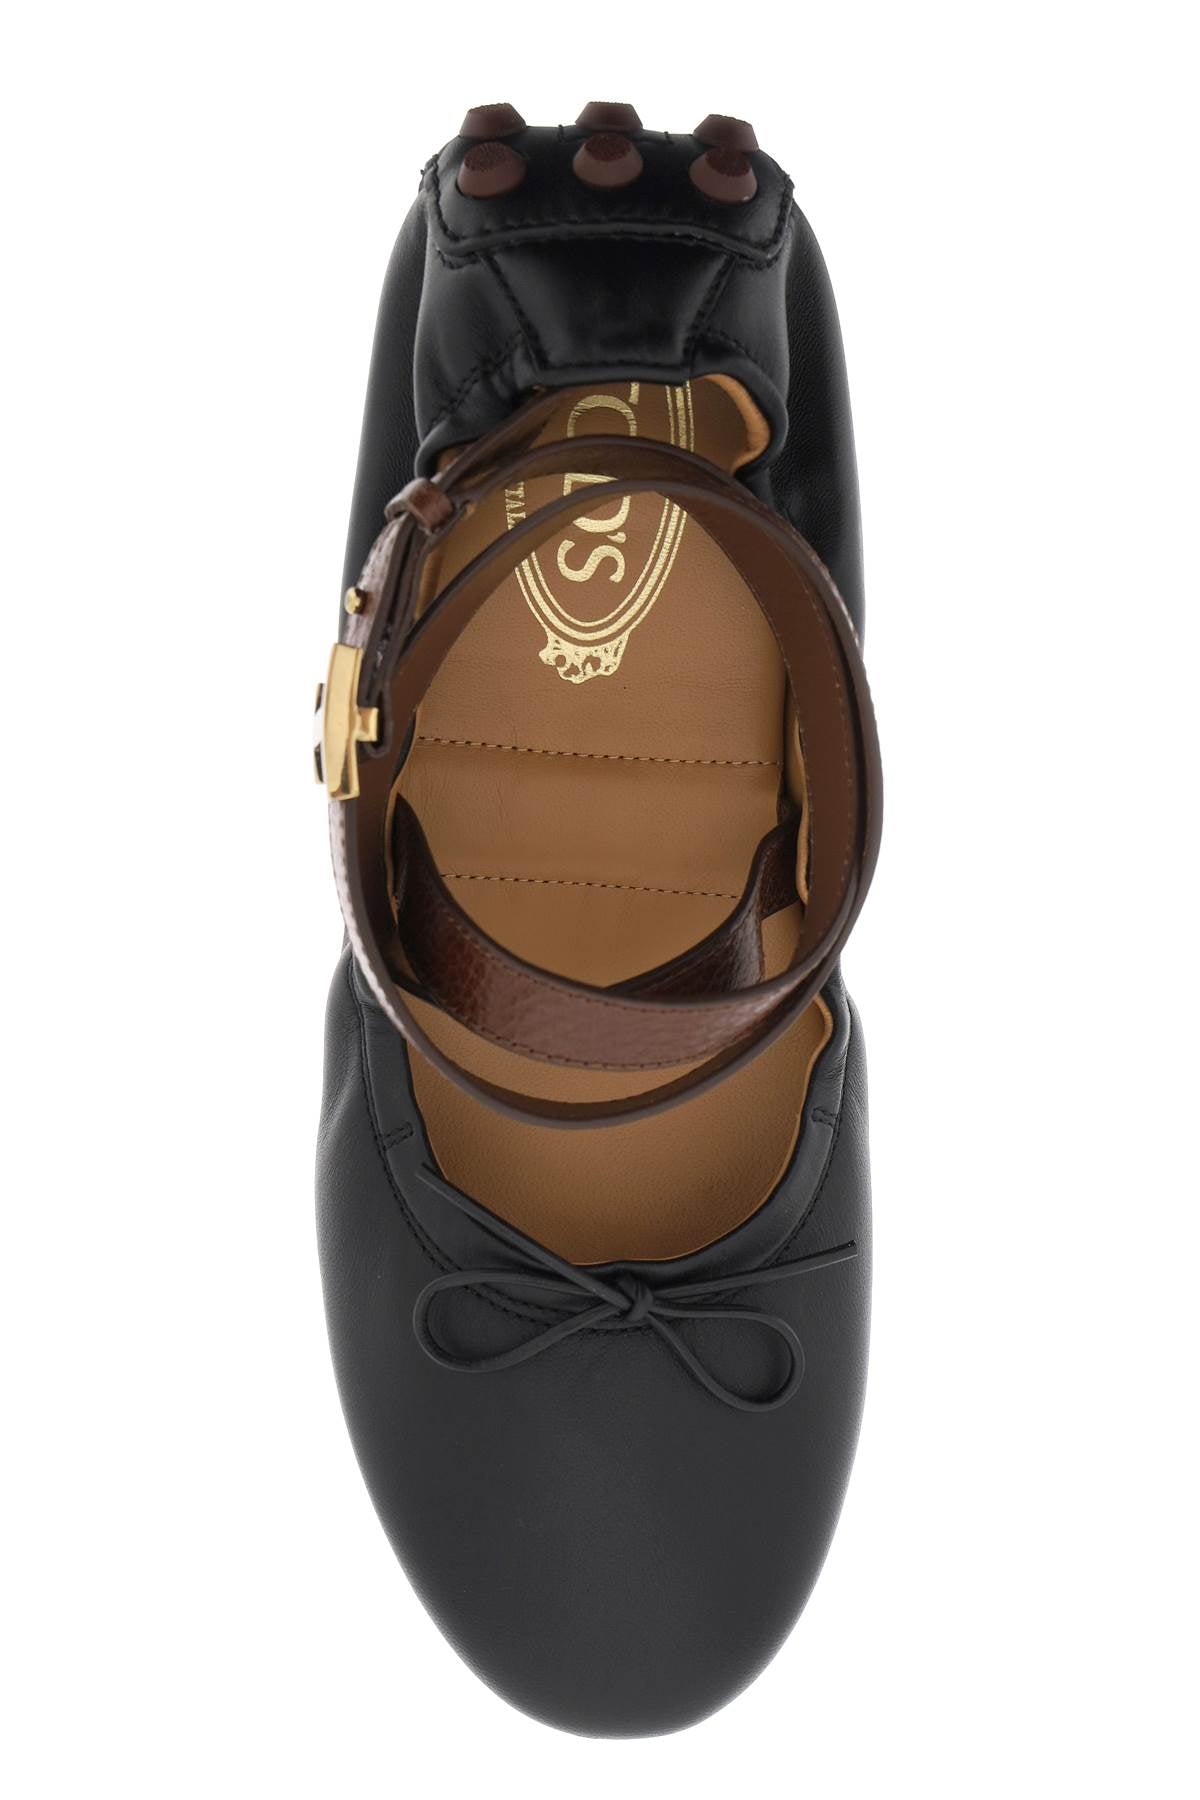 Tod's bubble leather ballet flats shoes with strap-1